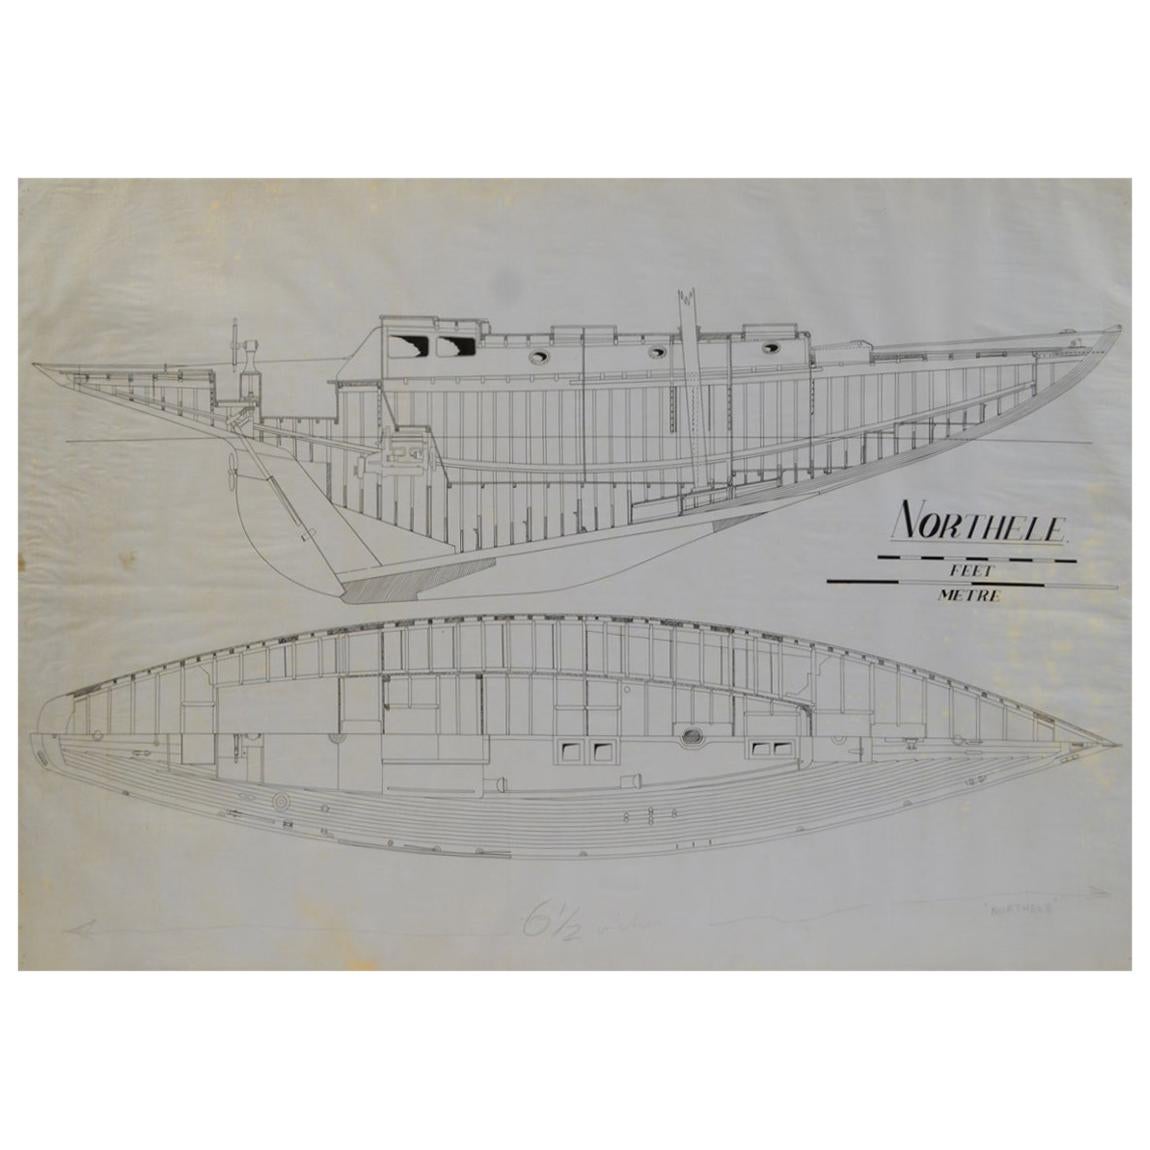 1949s Antique Northele Nautical Ship Project by Berthon Boats Uffa Fox archives For Sale